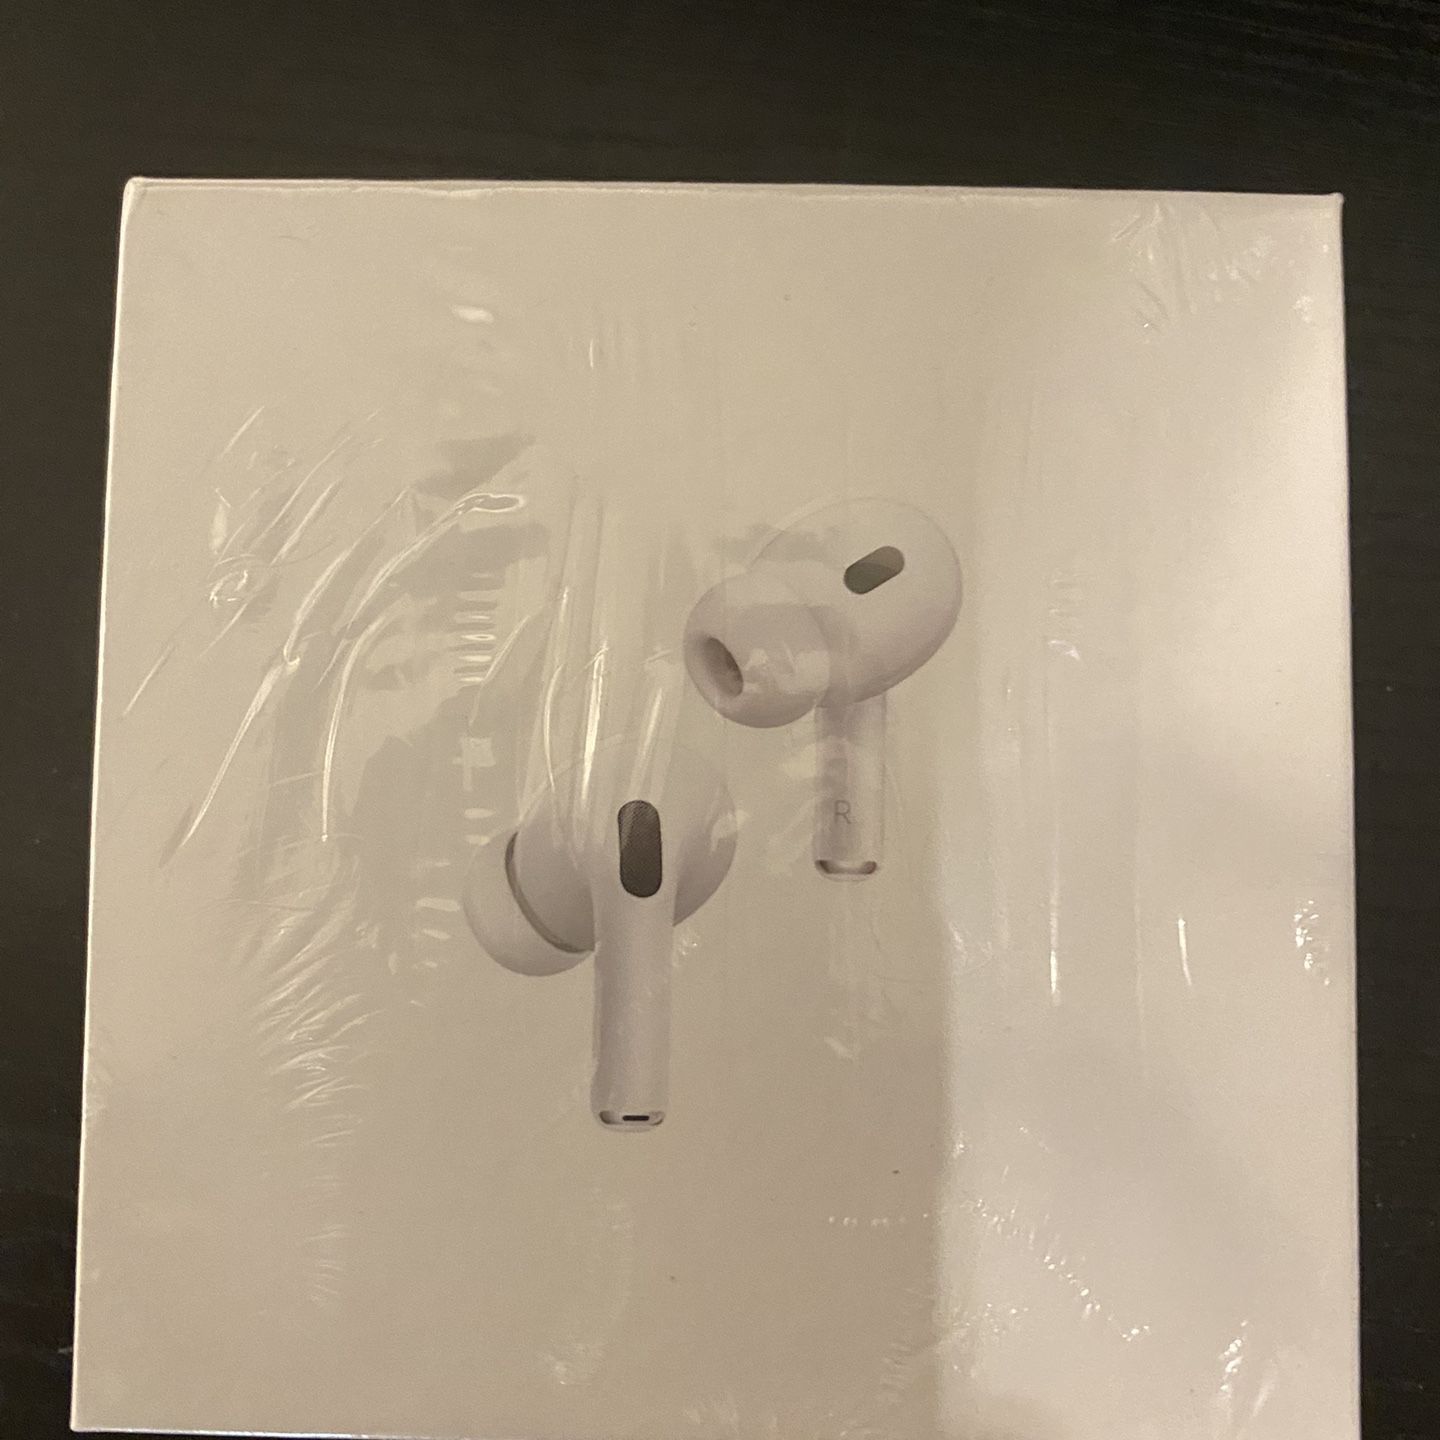 AirPods Pros Second Generation